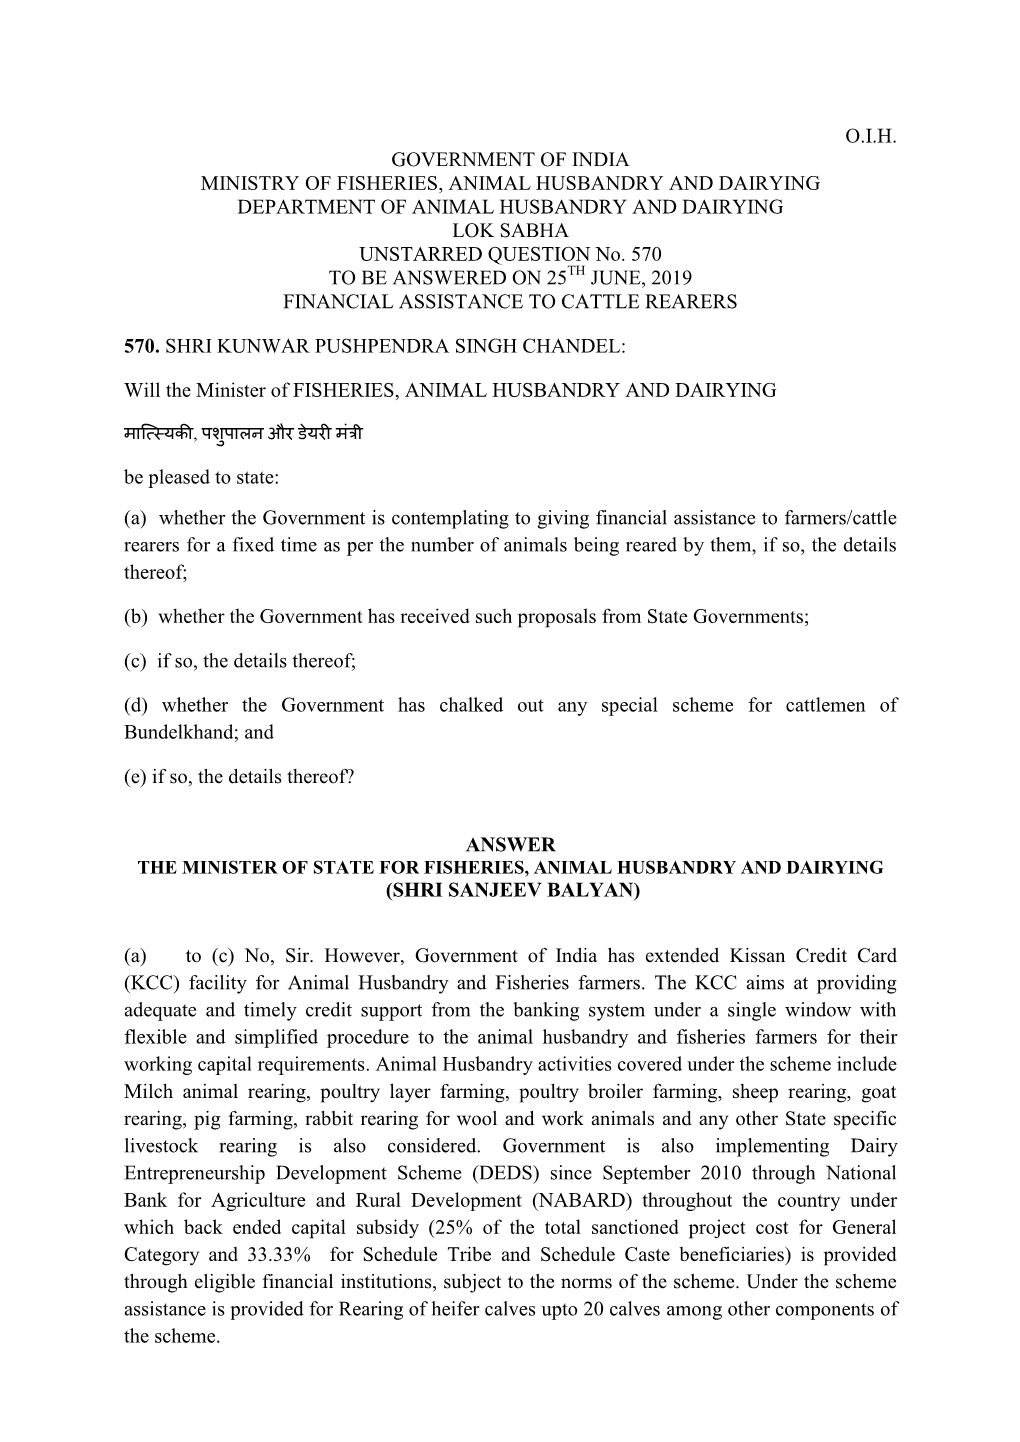 O.I.H. GOVERNMENT of INDIA MINISTRY of FISHERIES, ANIMAL HUSBANDRY and DAIRYING DEPARTMENT of ANIMAL HUSBANDRY and DAIRYING LOK SABHA UNSTARRED QUESTION No